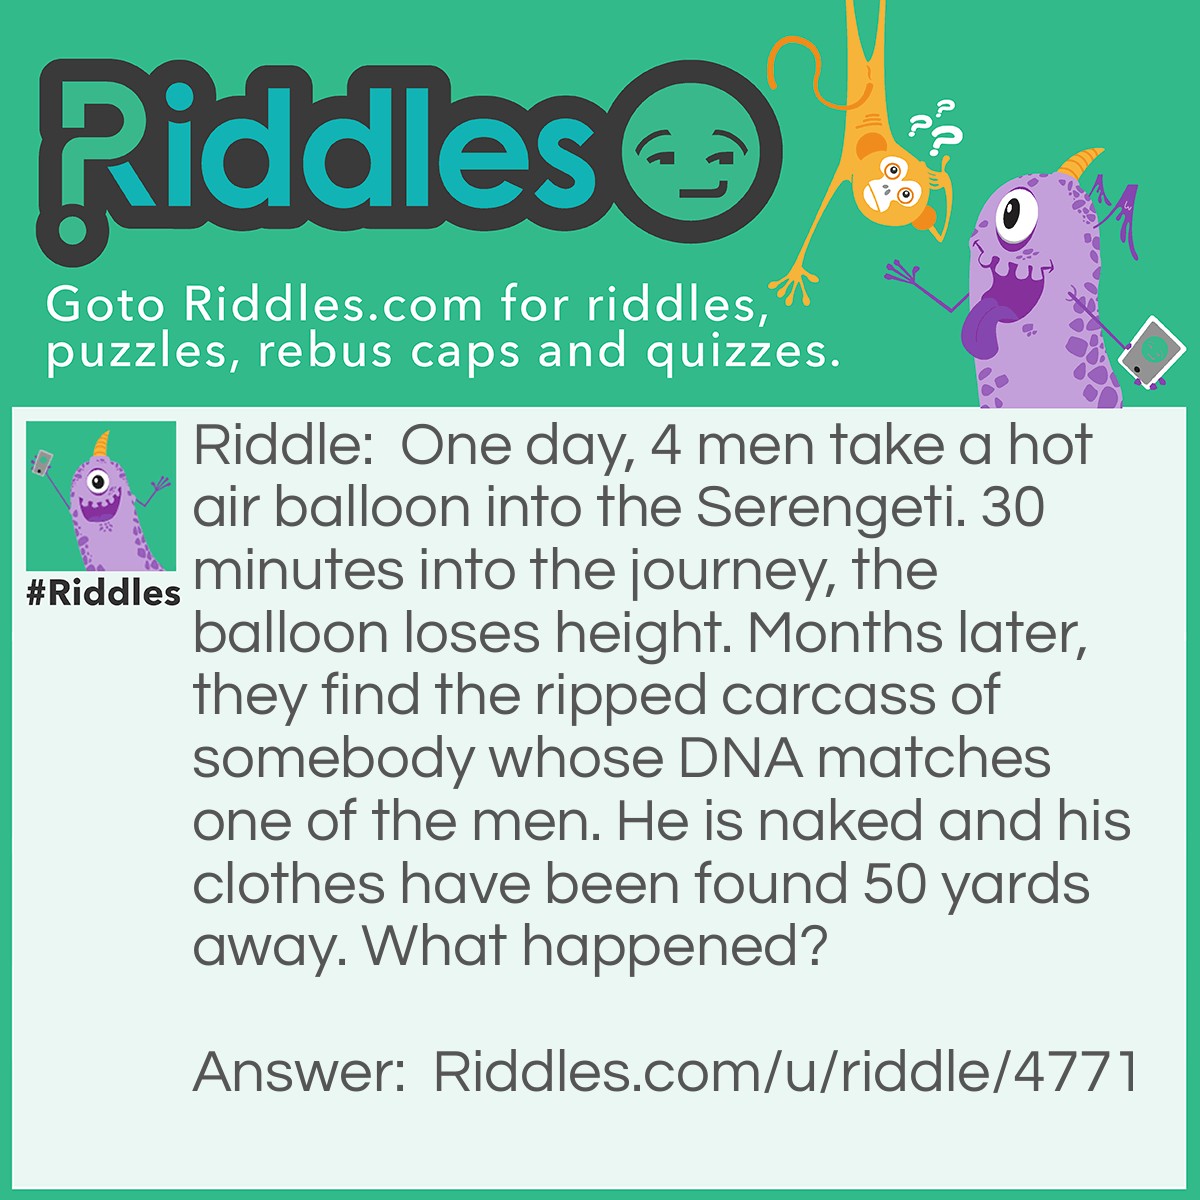 Riddle: One day, 4 men take a hot air balloon into the Serengeti. 30 minutes into the journey, the balloon loses height. Months later, they find the ripped carcass of somebody whose DNA matches one of the men. He is naked and his clothes have been found 50 yards away. What happened? Answer: When the balloon lost altitude, the men threw their clothes overboard to avoid crashing. The men had a Rock Paper Scissors tournament to see who would jump. The man lost the loser's bracket and jumped. Later, a lion found him and ate some of him. Explorers then find his body 150 feet away from his clothes.